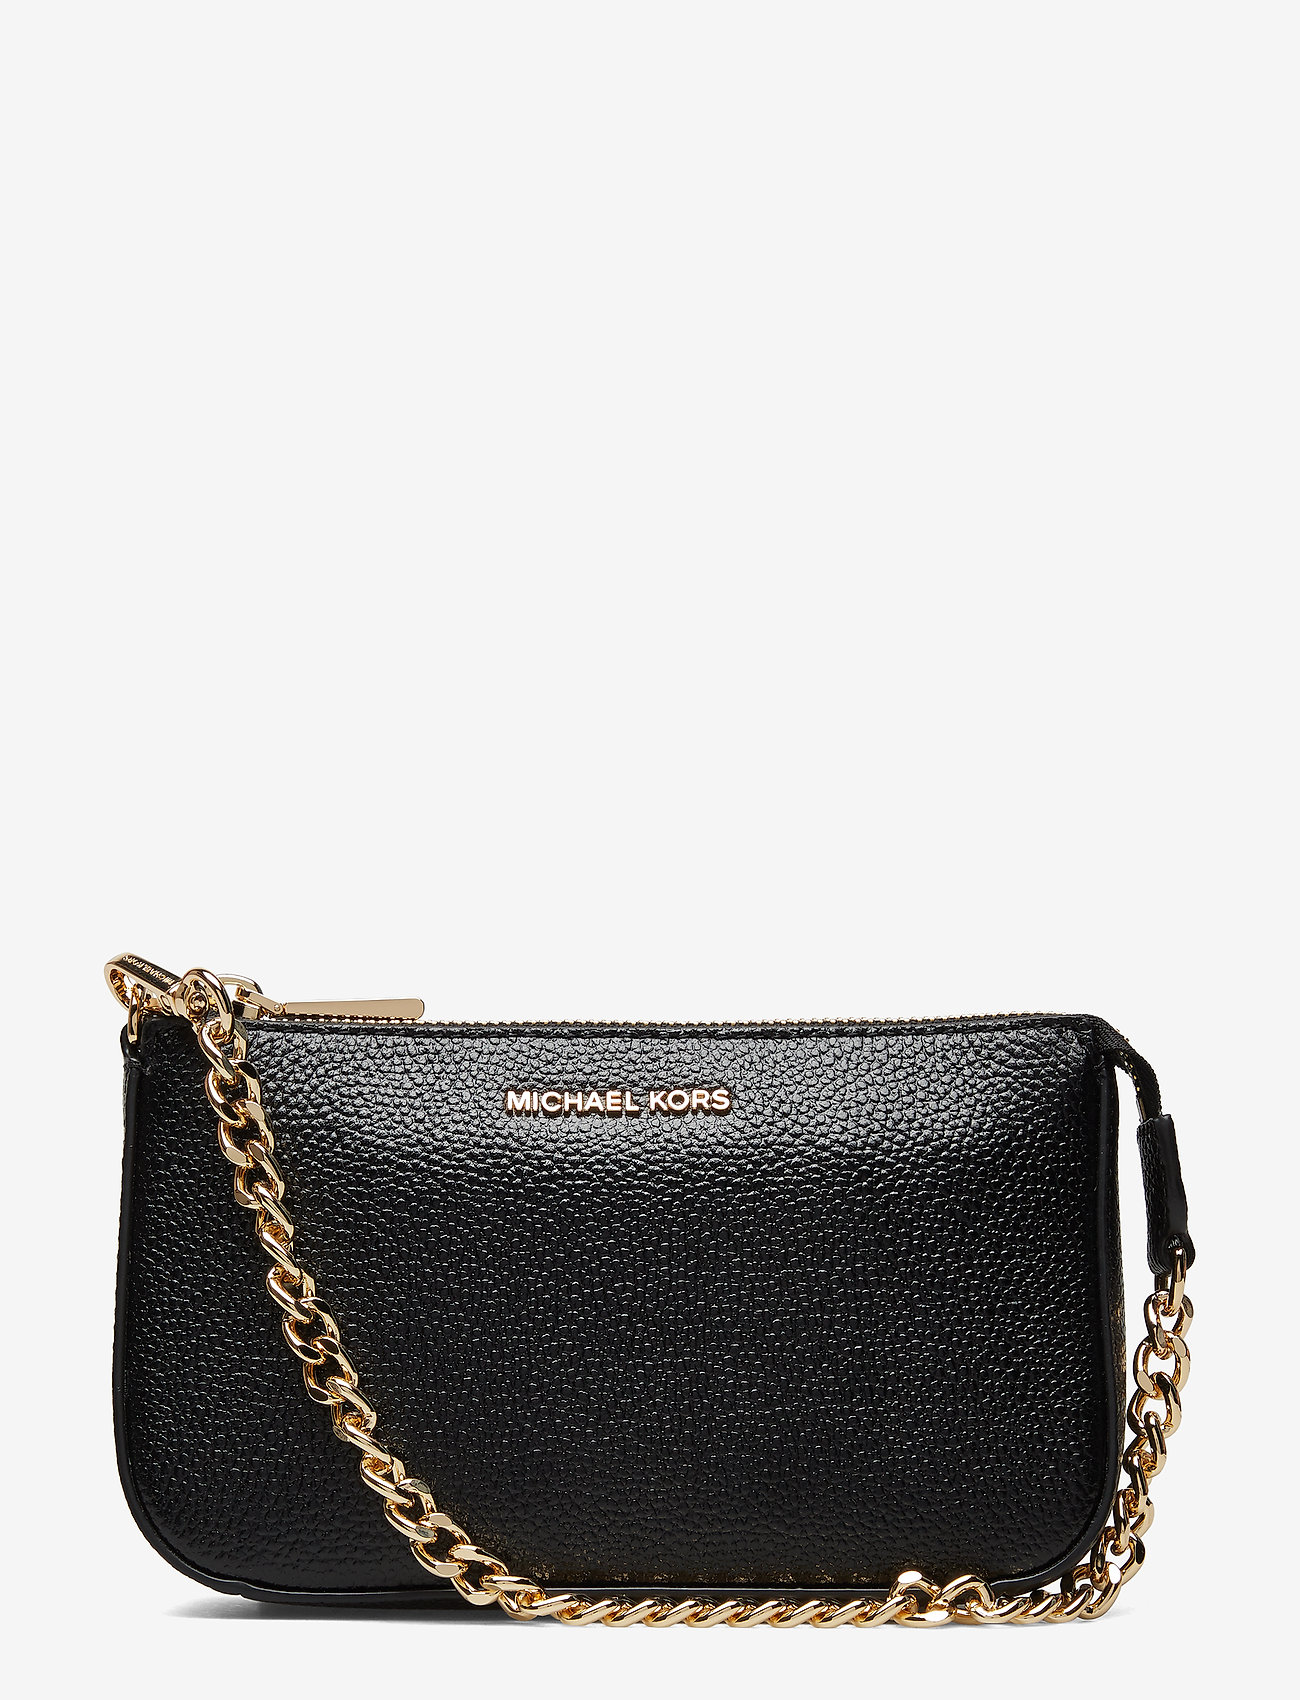 michael kors black clutch with gold chain